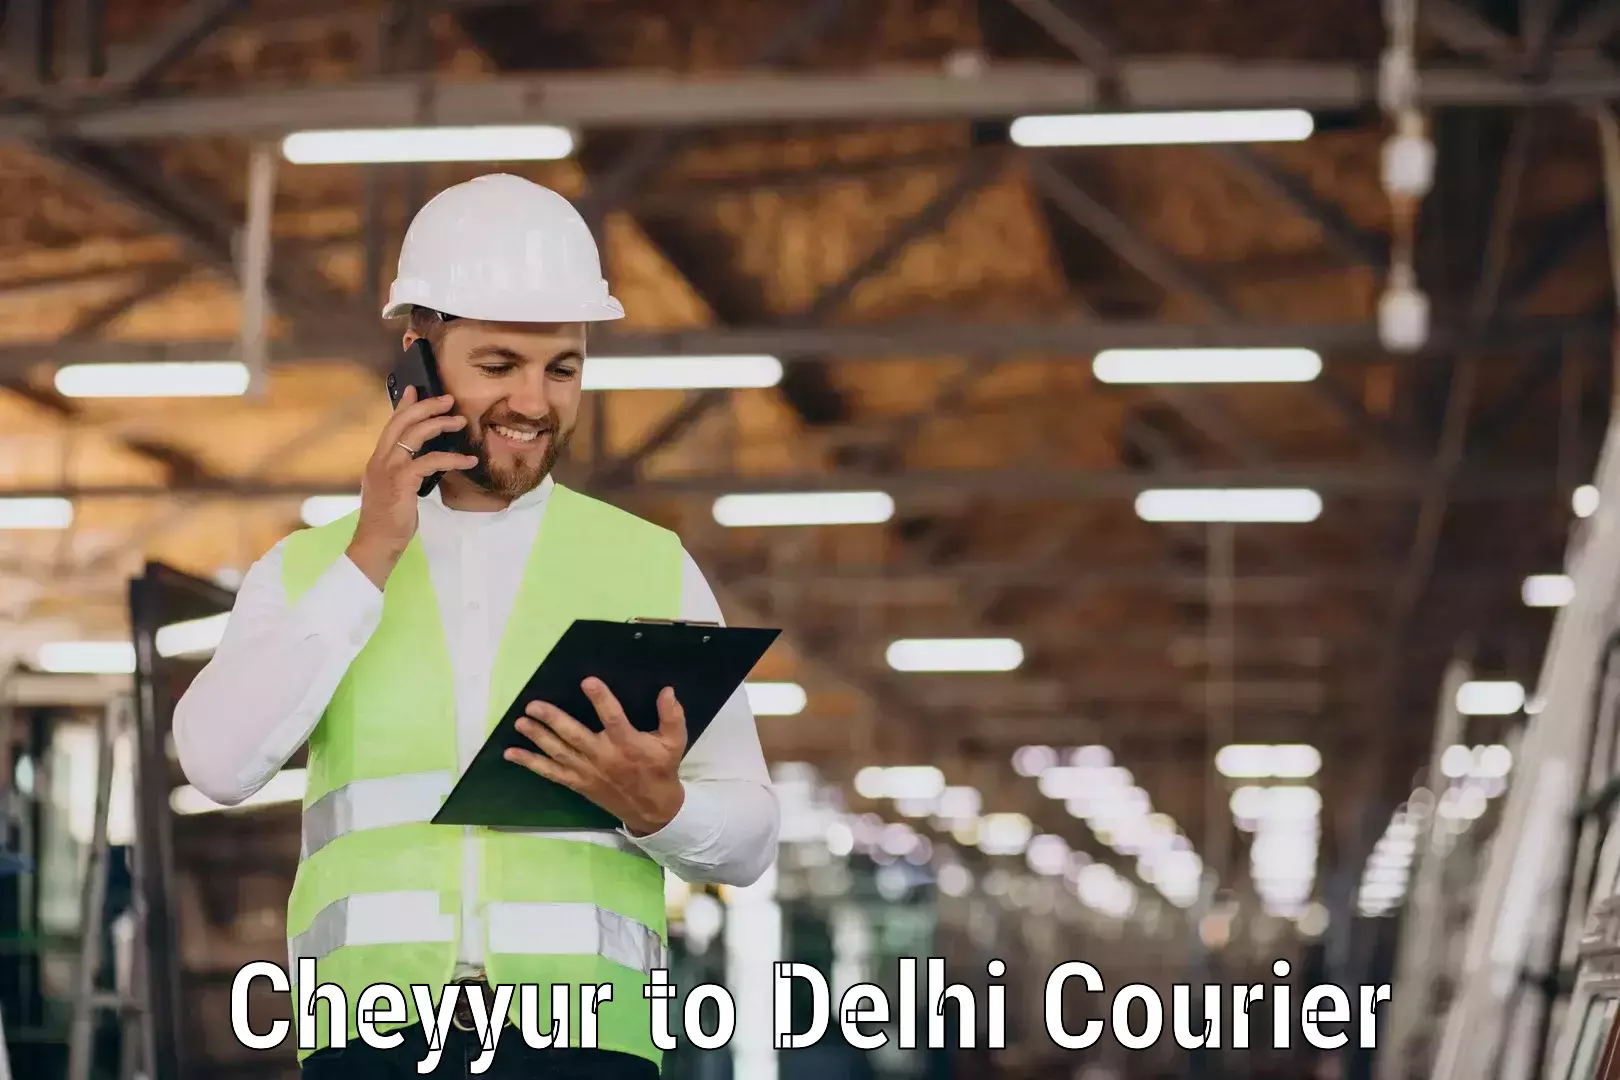 Fast delivery service Cheyyur to Delhi